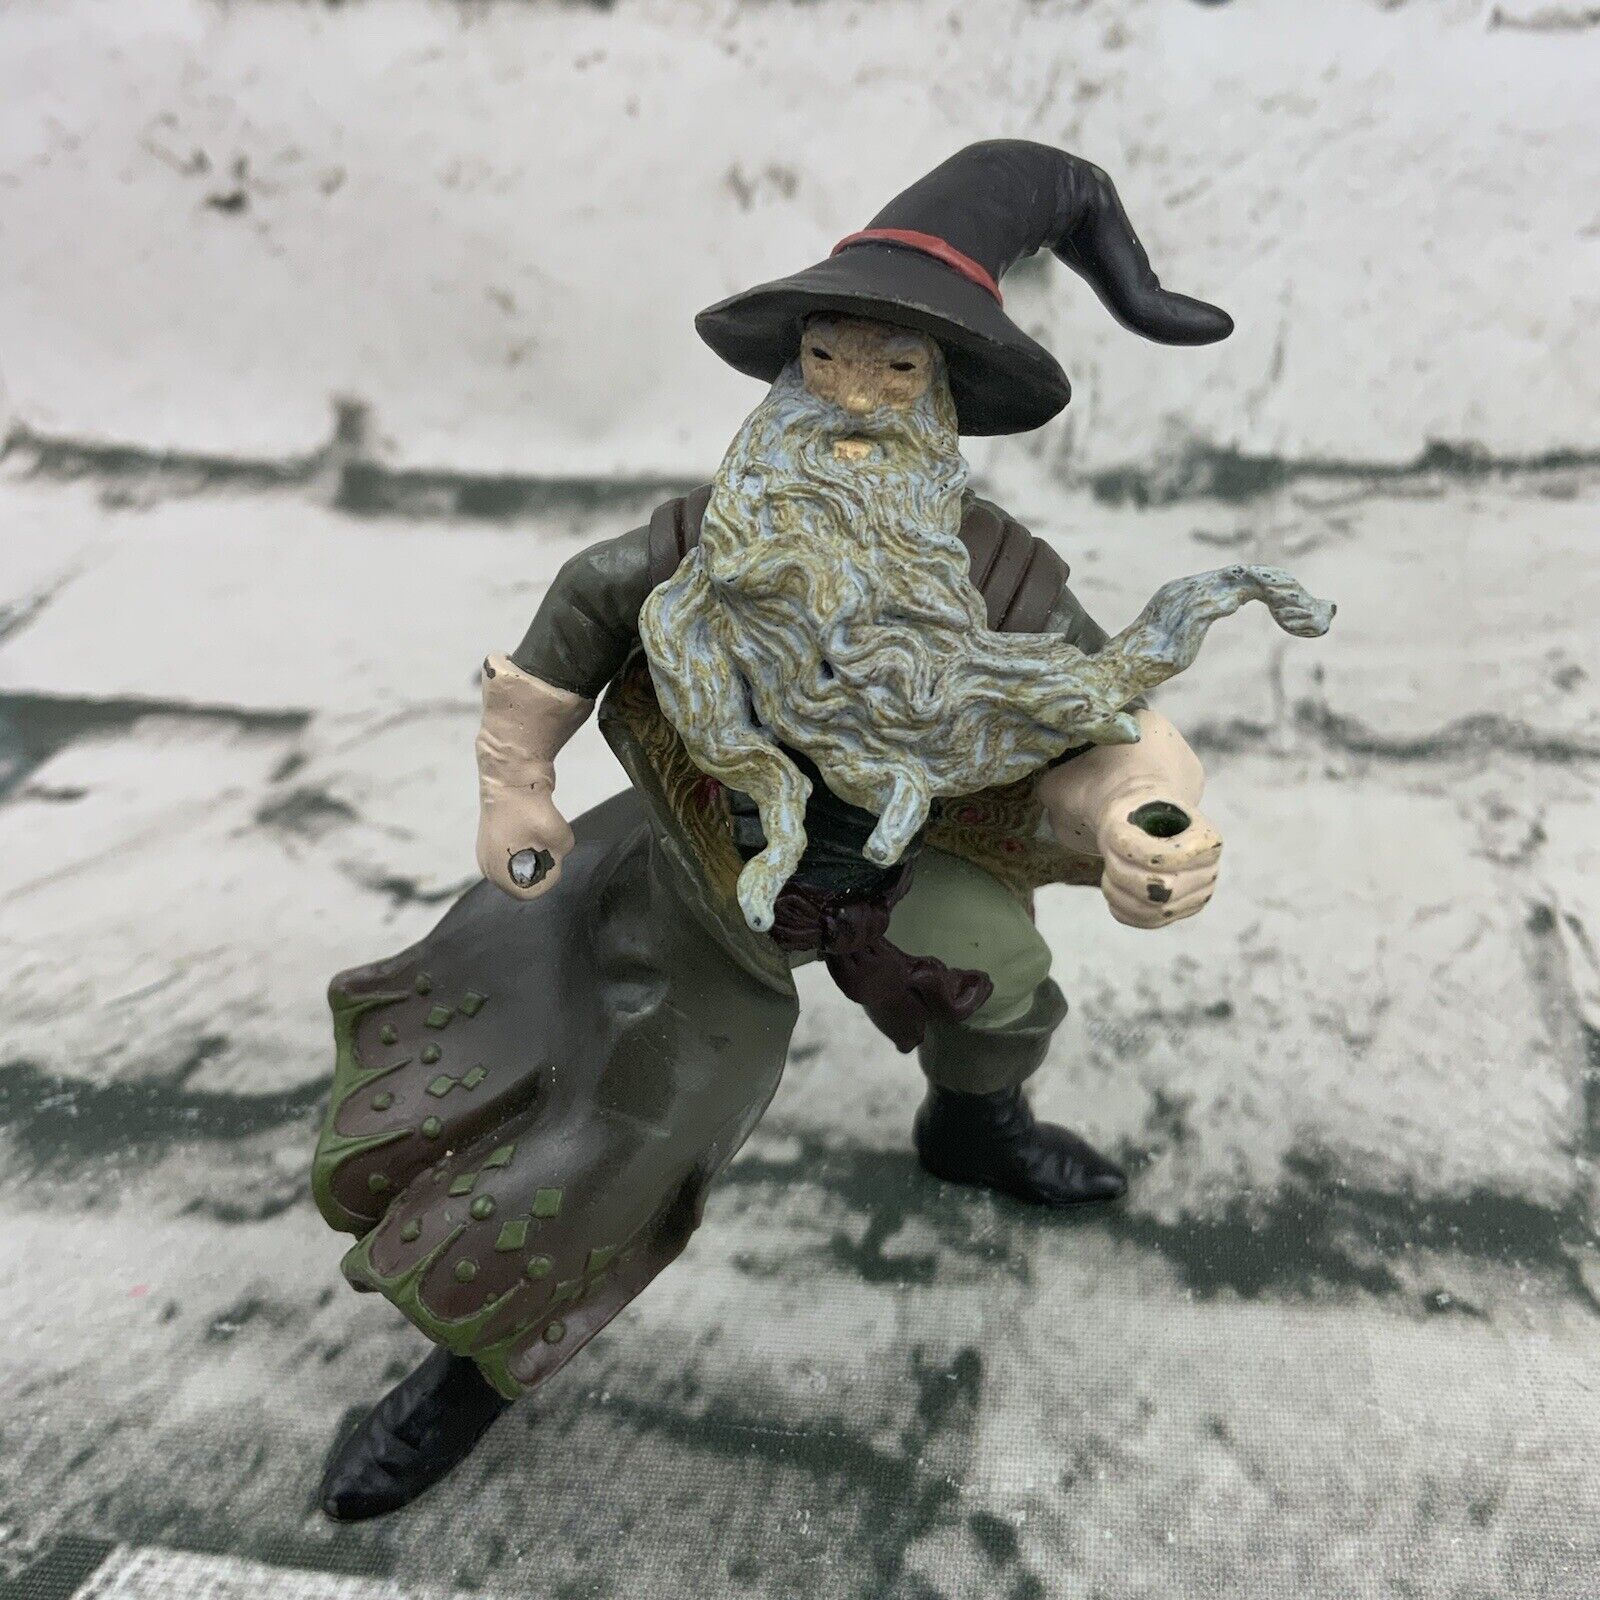 Finally resale start Papo 2005 Old Wizard Bombing free shipping Figure Long Replacement Beard White